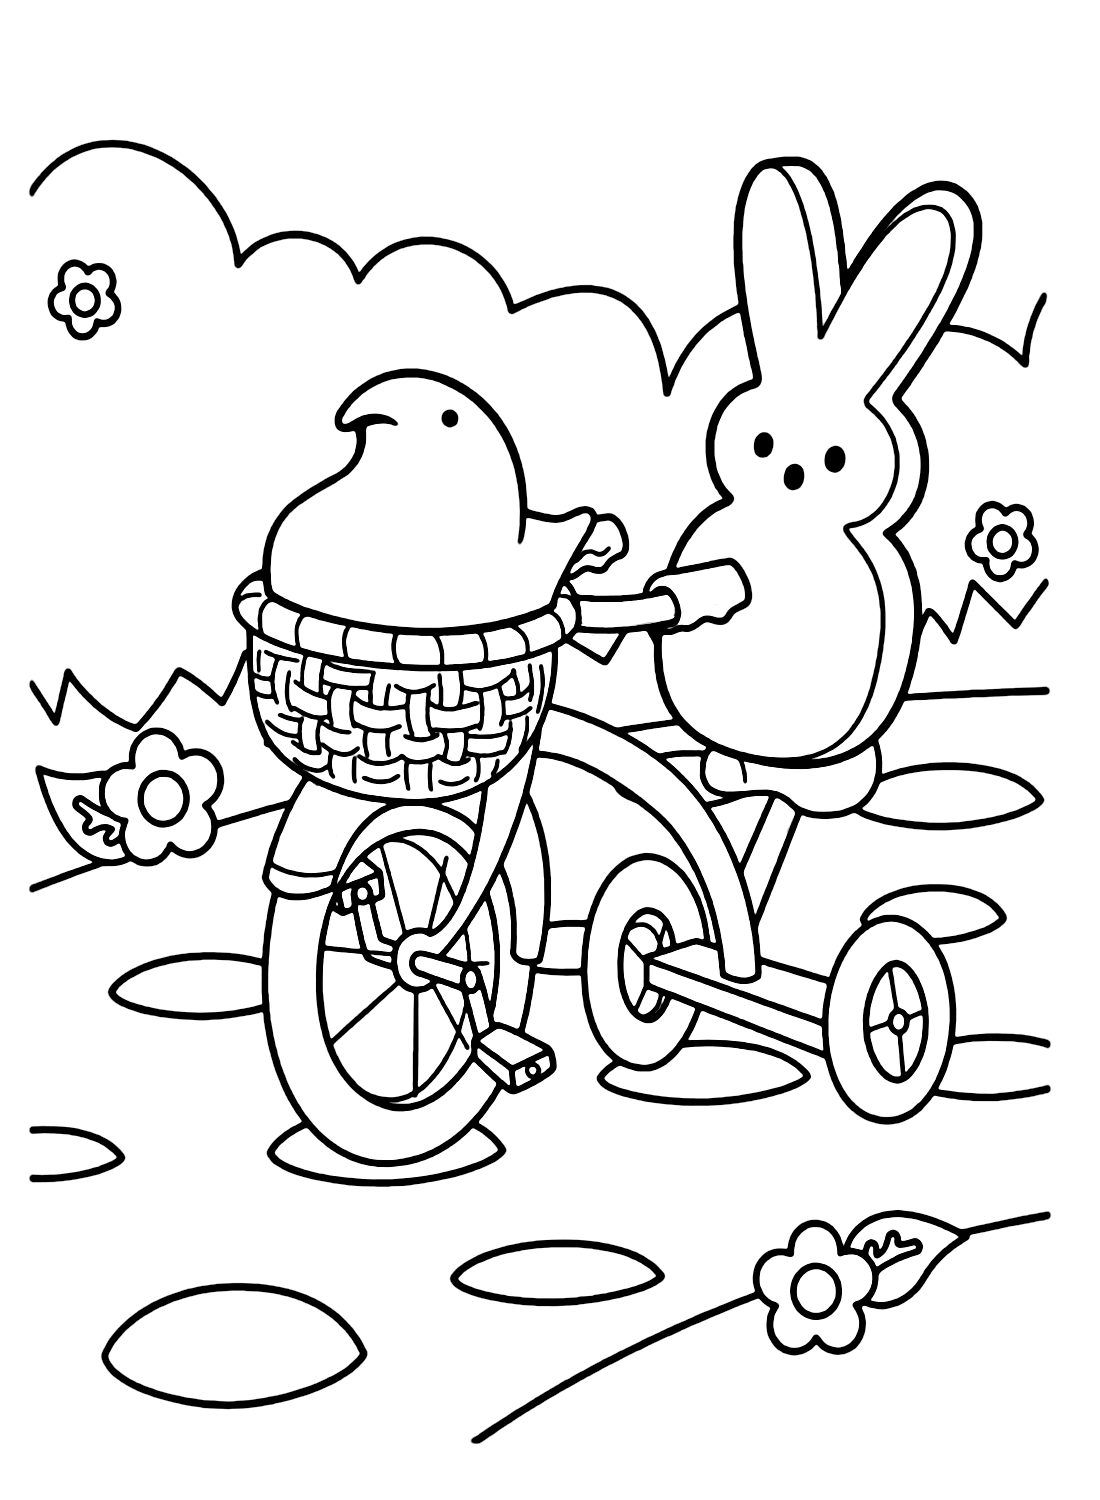 Rabbit and Chick Peeps Cycling Coloring Pages